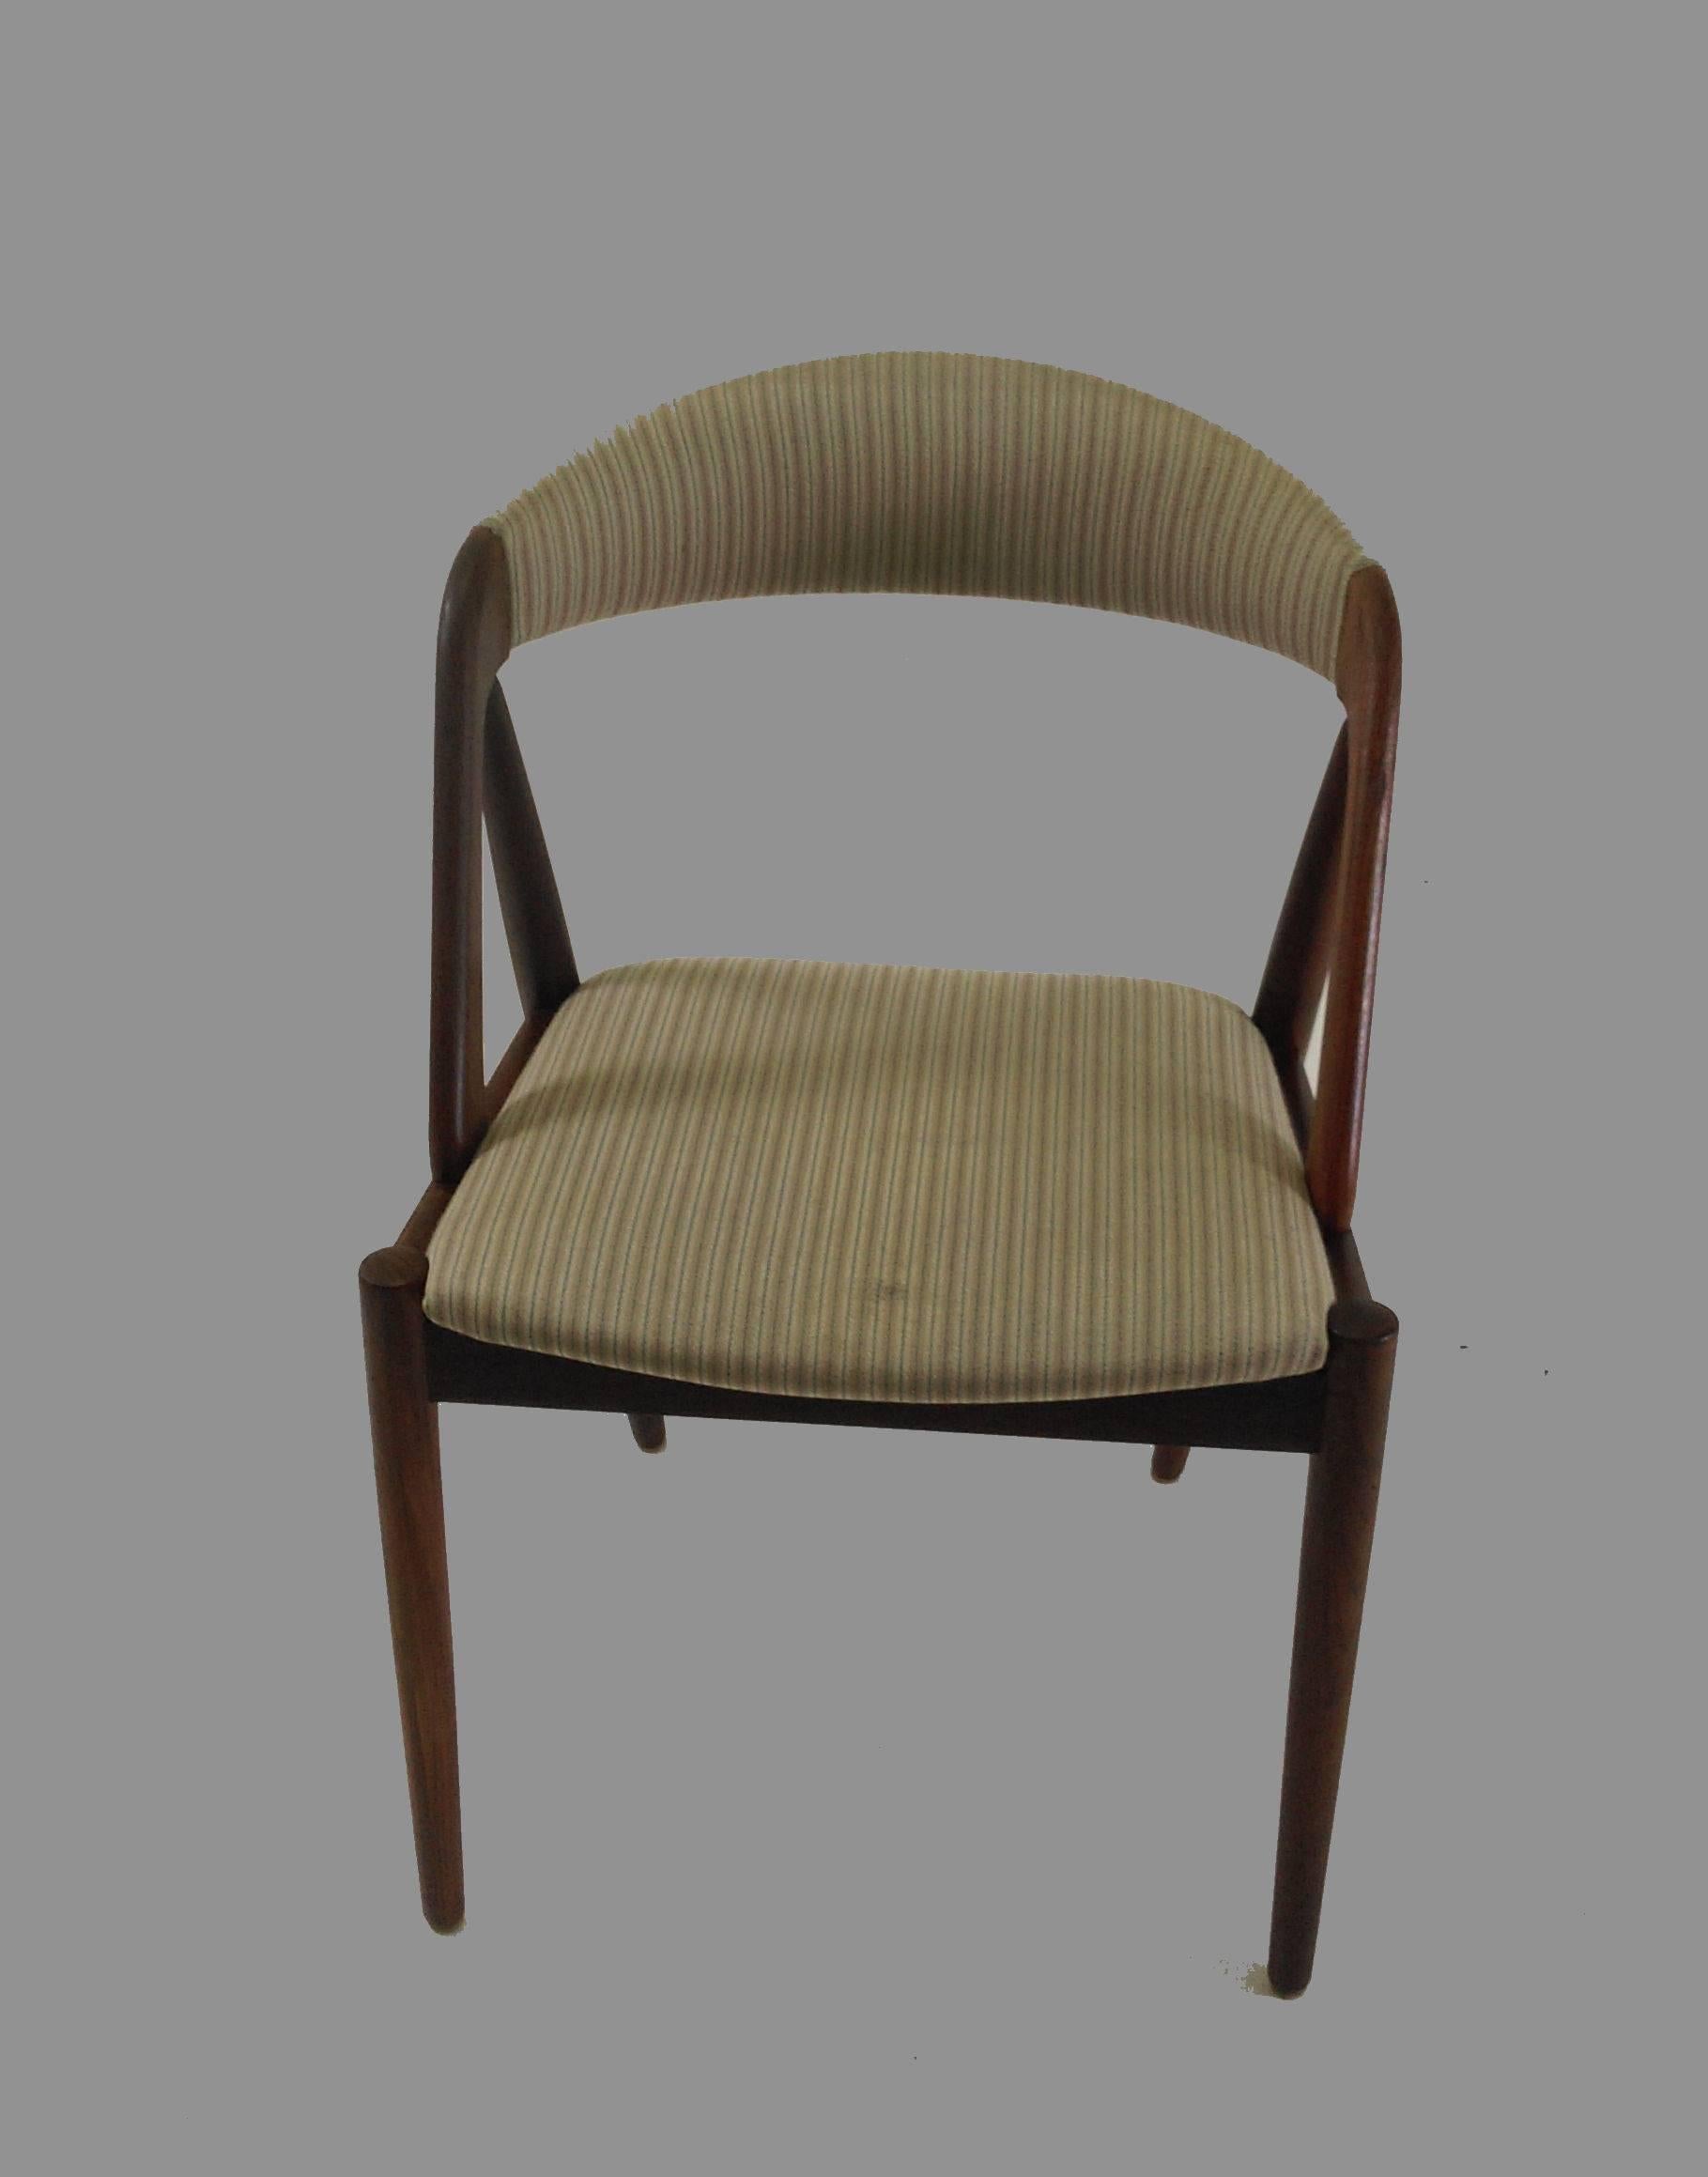 Model 31 is one of the most well-known chairs designed by Kai Kristiansen - a true Classic with its curved backrest, crooked angles, straight lines and is as all of Kai Kristiansens chairs very comfortable. The A-frame model 31 dining chairs were